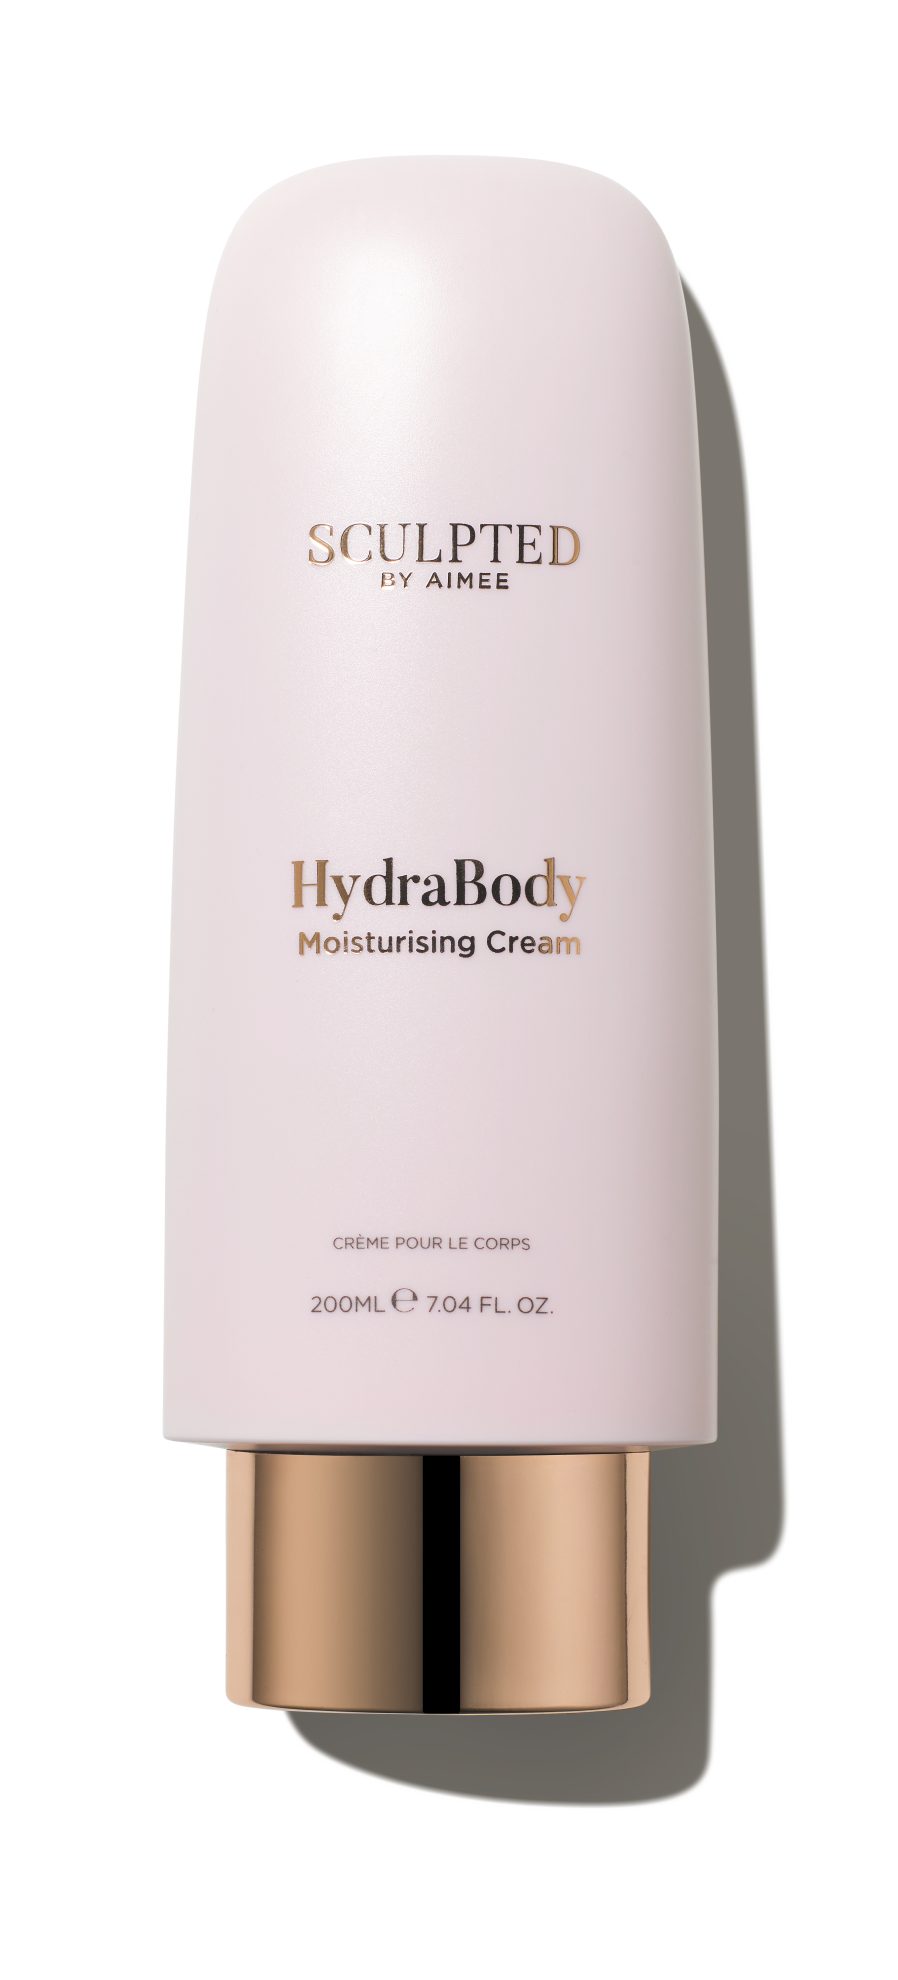 Sculpted by Aimee HydraBody
